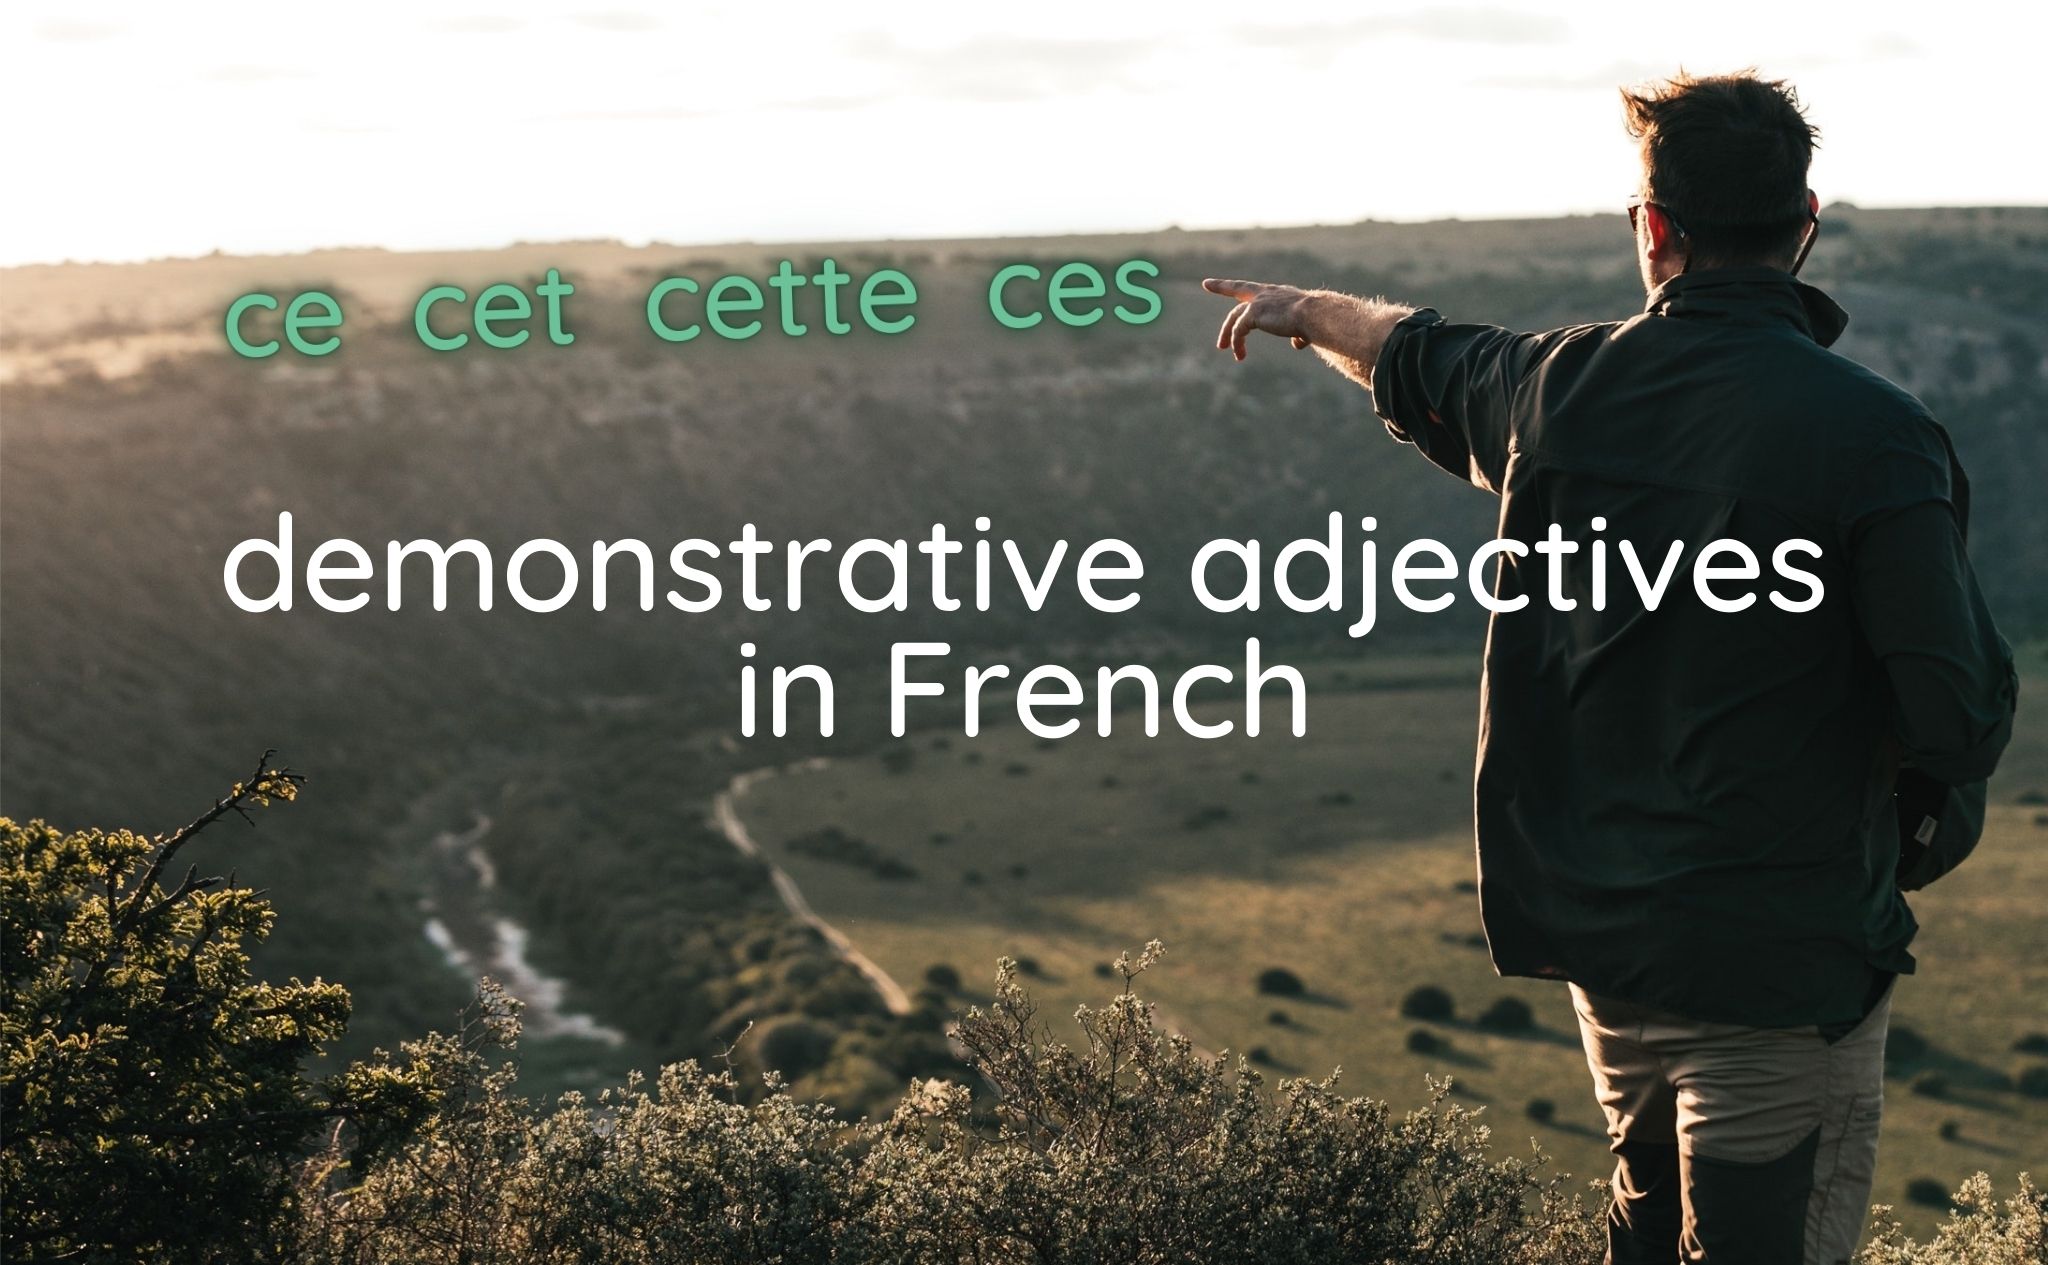 ce-cet-cette-ces-a-guide-to-the-demonstrative-adjectives-in-french